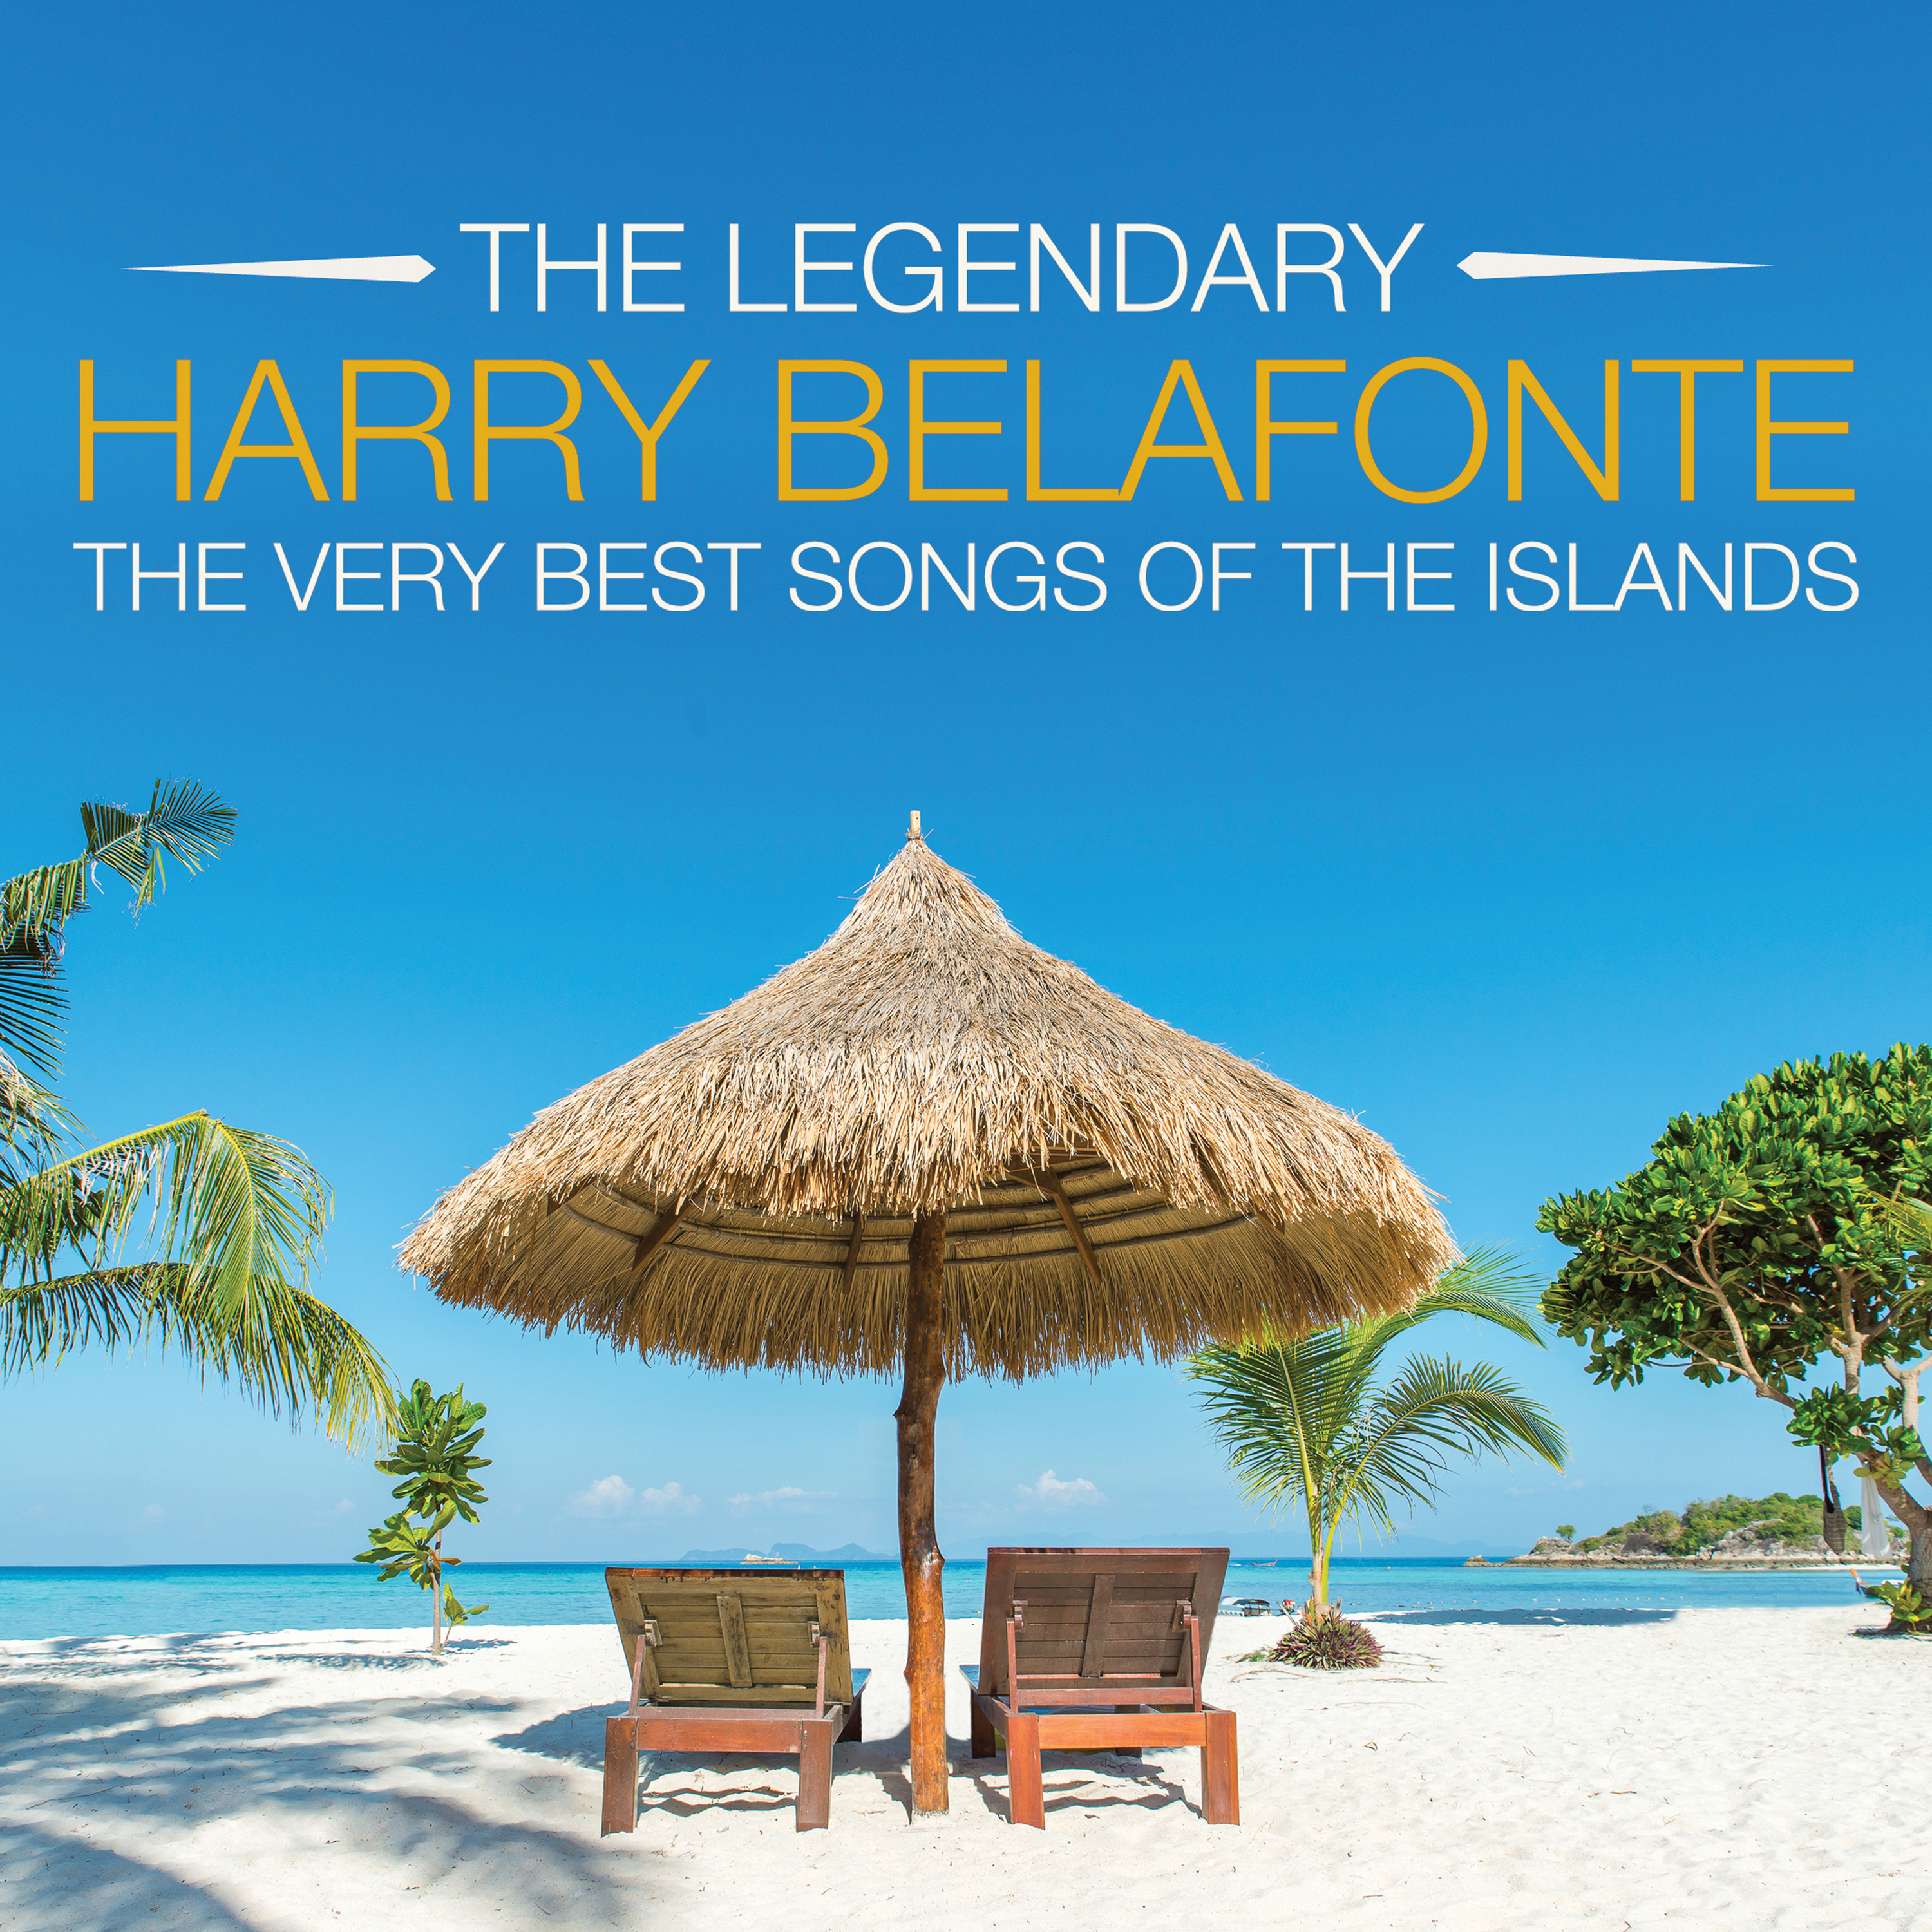 HARRY BELAFONTE - The Very Best Songs of the Islands